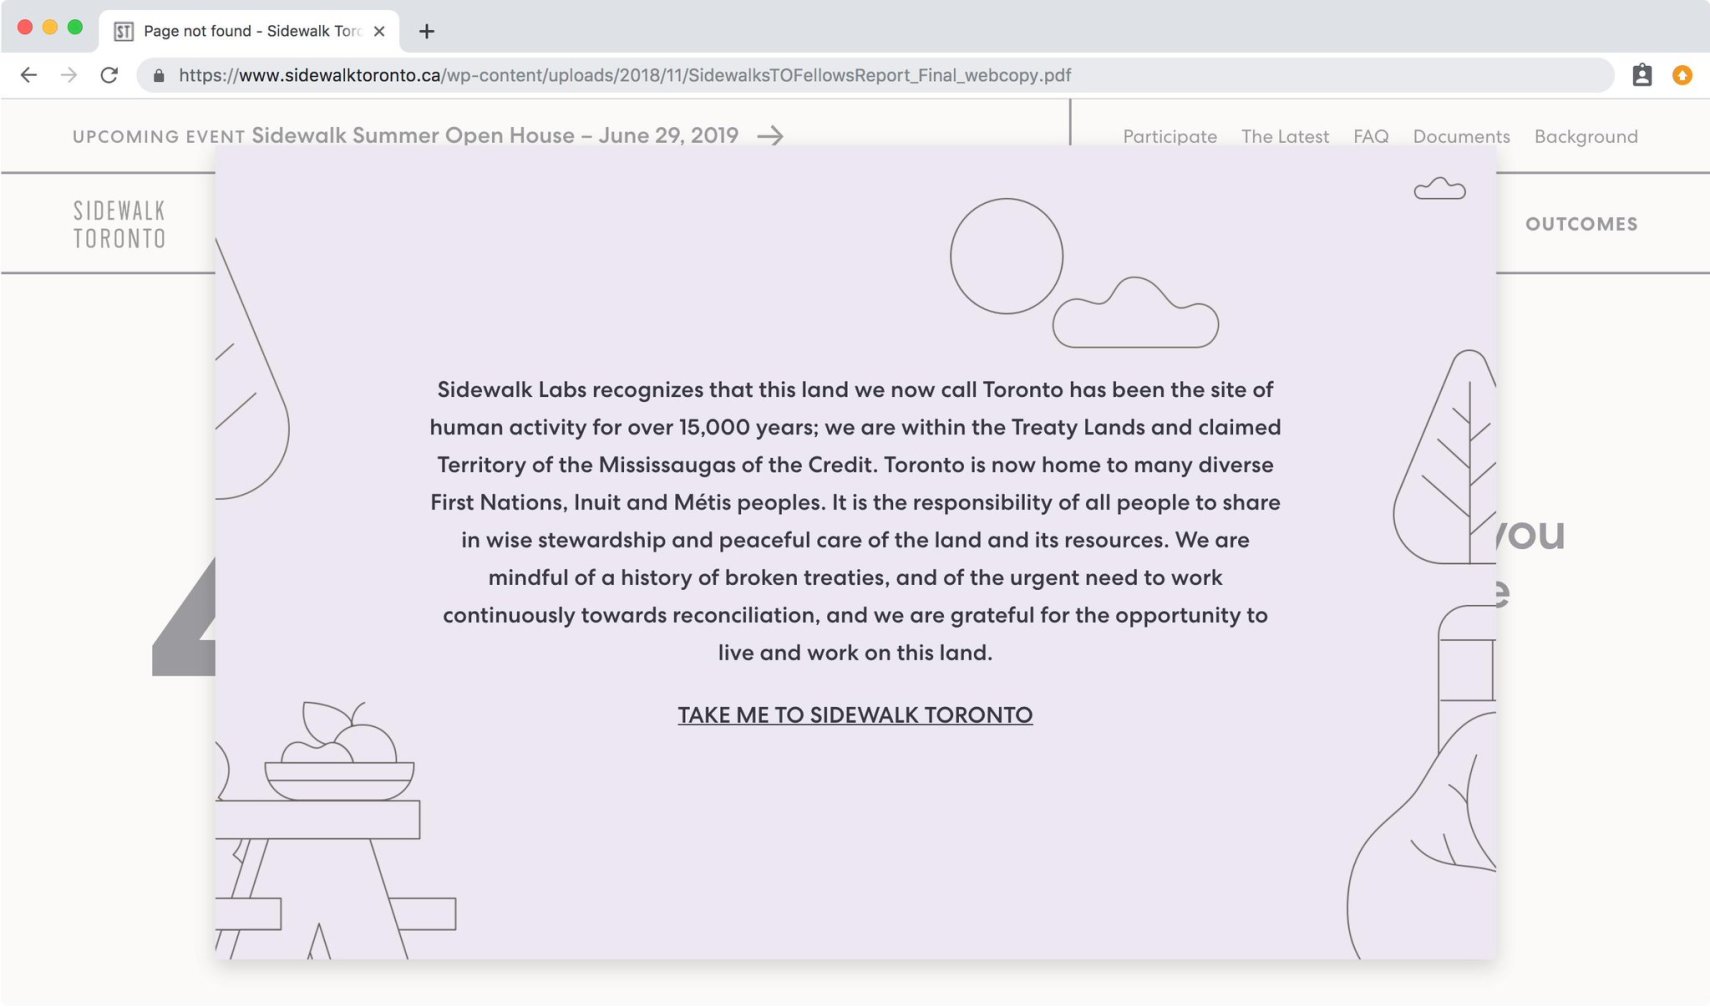 A screenshot of the Sidewalk Toronto website covered by a popup alert with a statement acknowledging that Toronto is within the Treaty Lands and claimed Territory of the Mississaugas of the Credit, and an expression of gratitude.